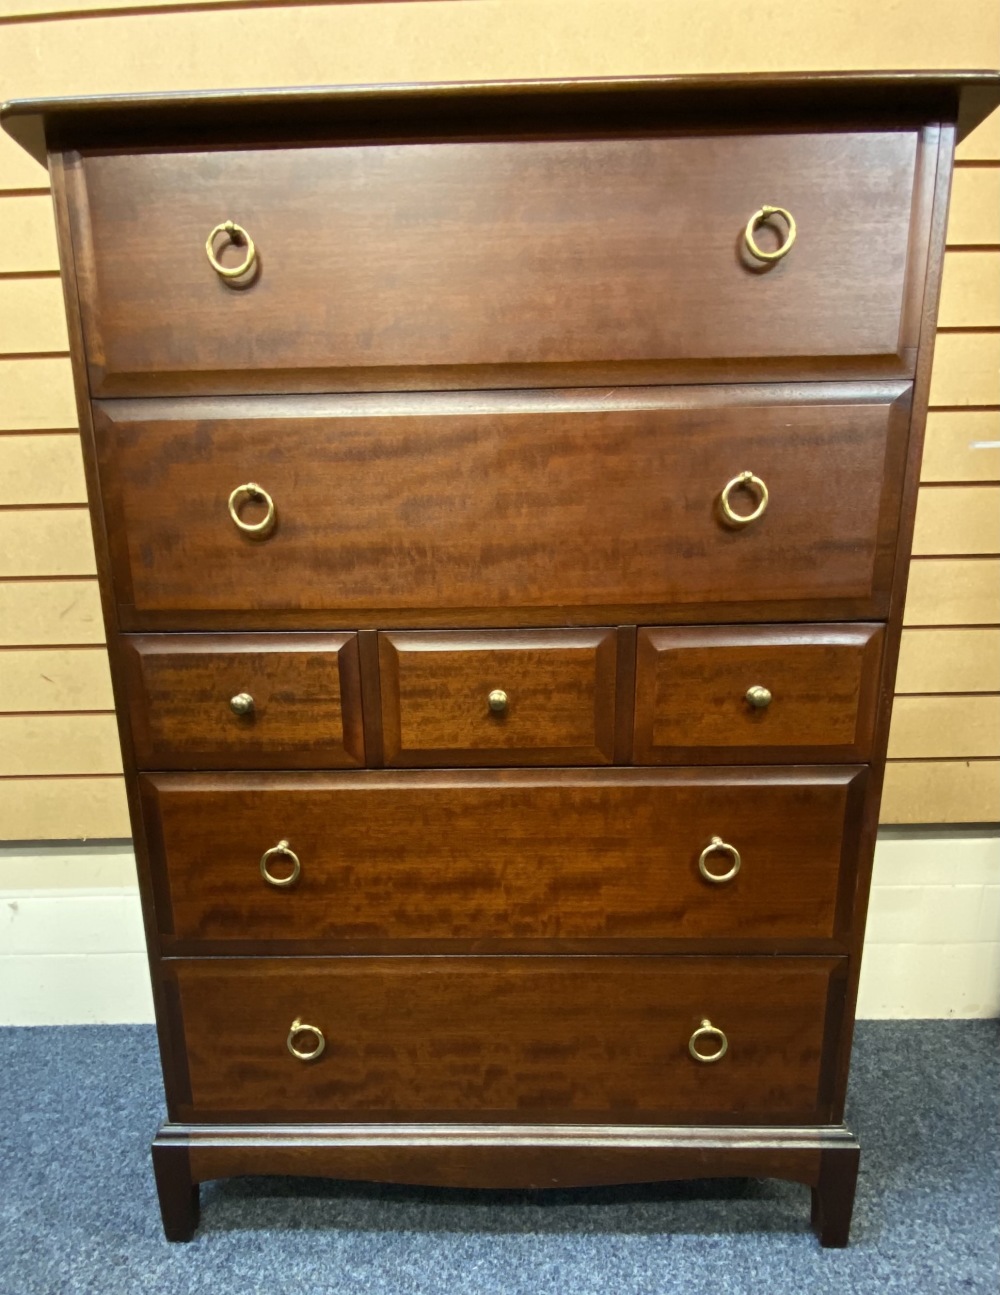 STAG MINSTREL MULTI-DRAWER BEDROOM CHEST - having two long over three short over two long drawers, - Image 2 of 4